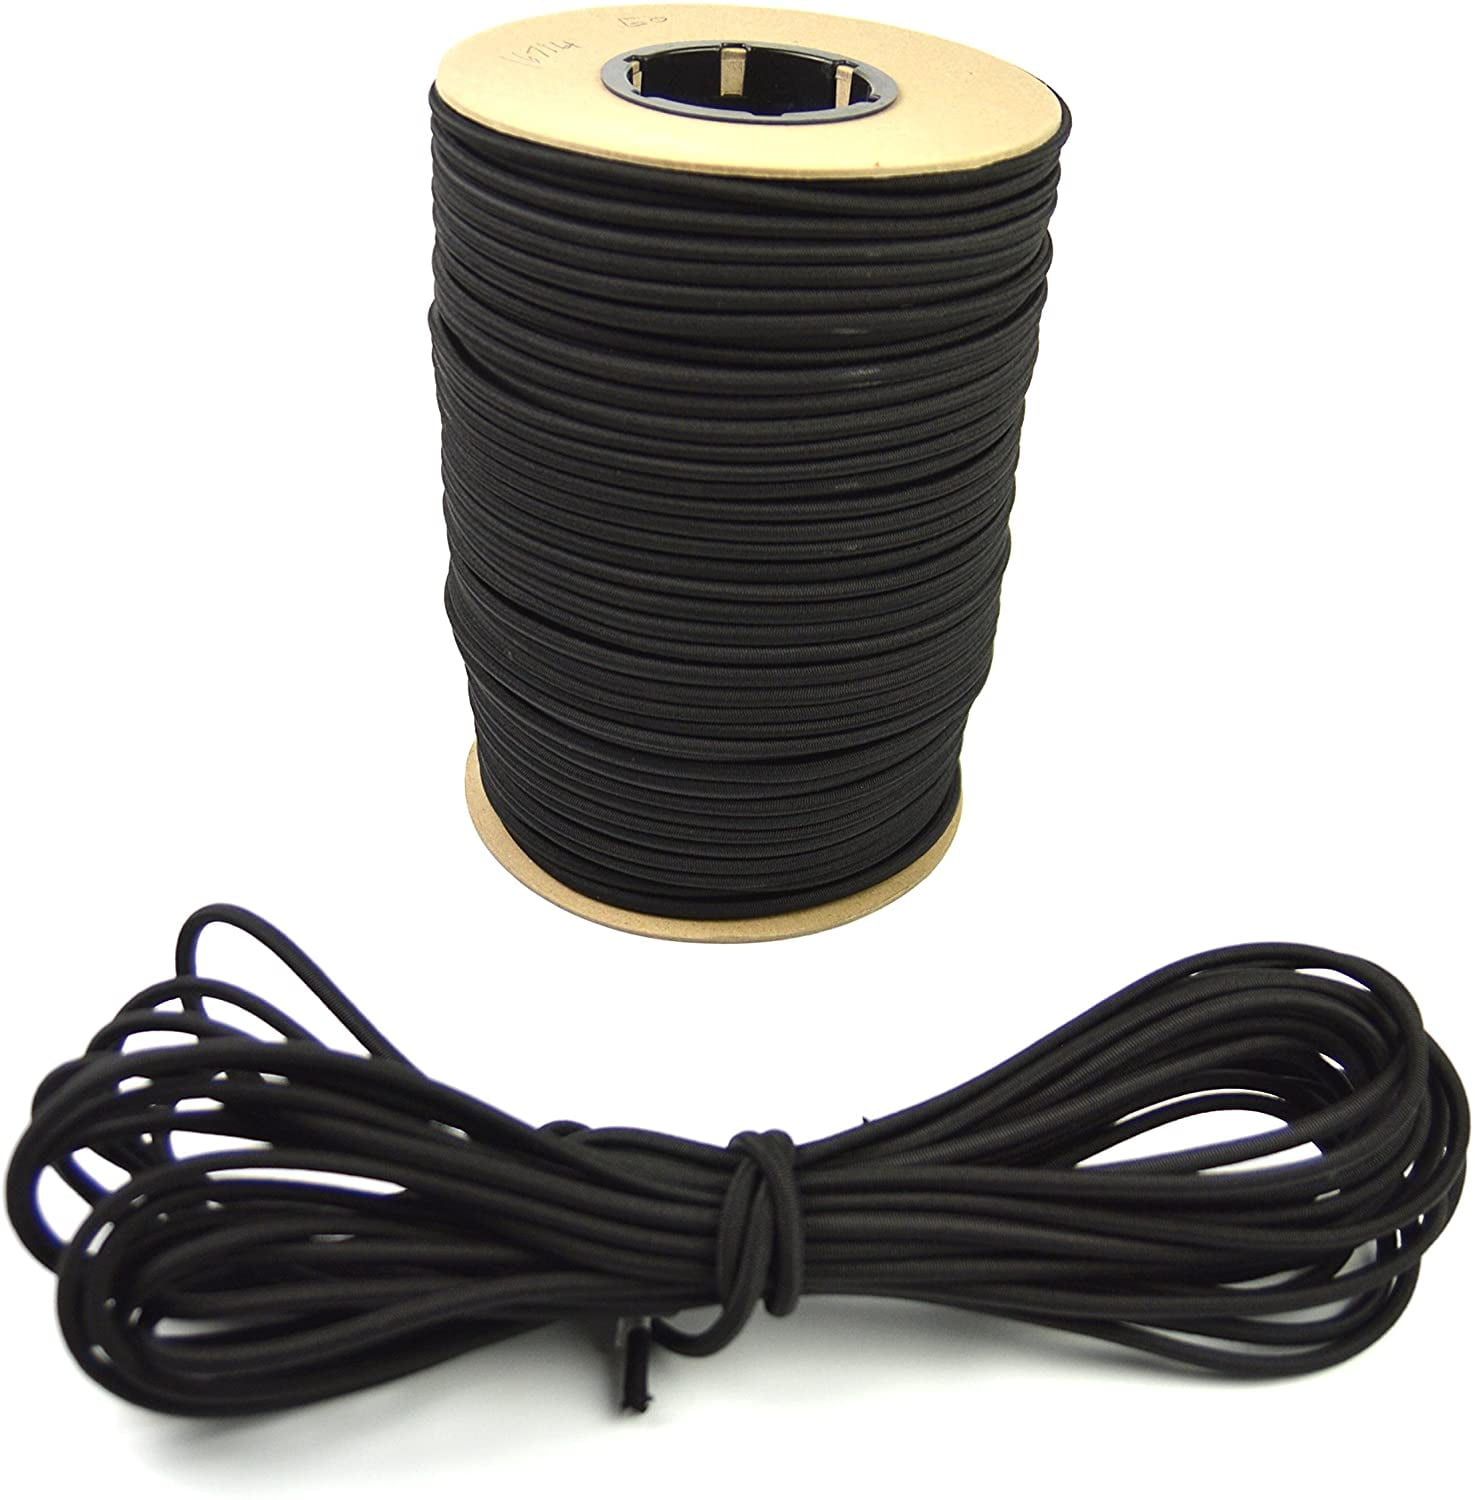 1000 PARACORD PLANET 1/16” Diameter Elastic Stretch Bungee Shock Cord in 10 1300 Feet Options 250 50 100 25 